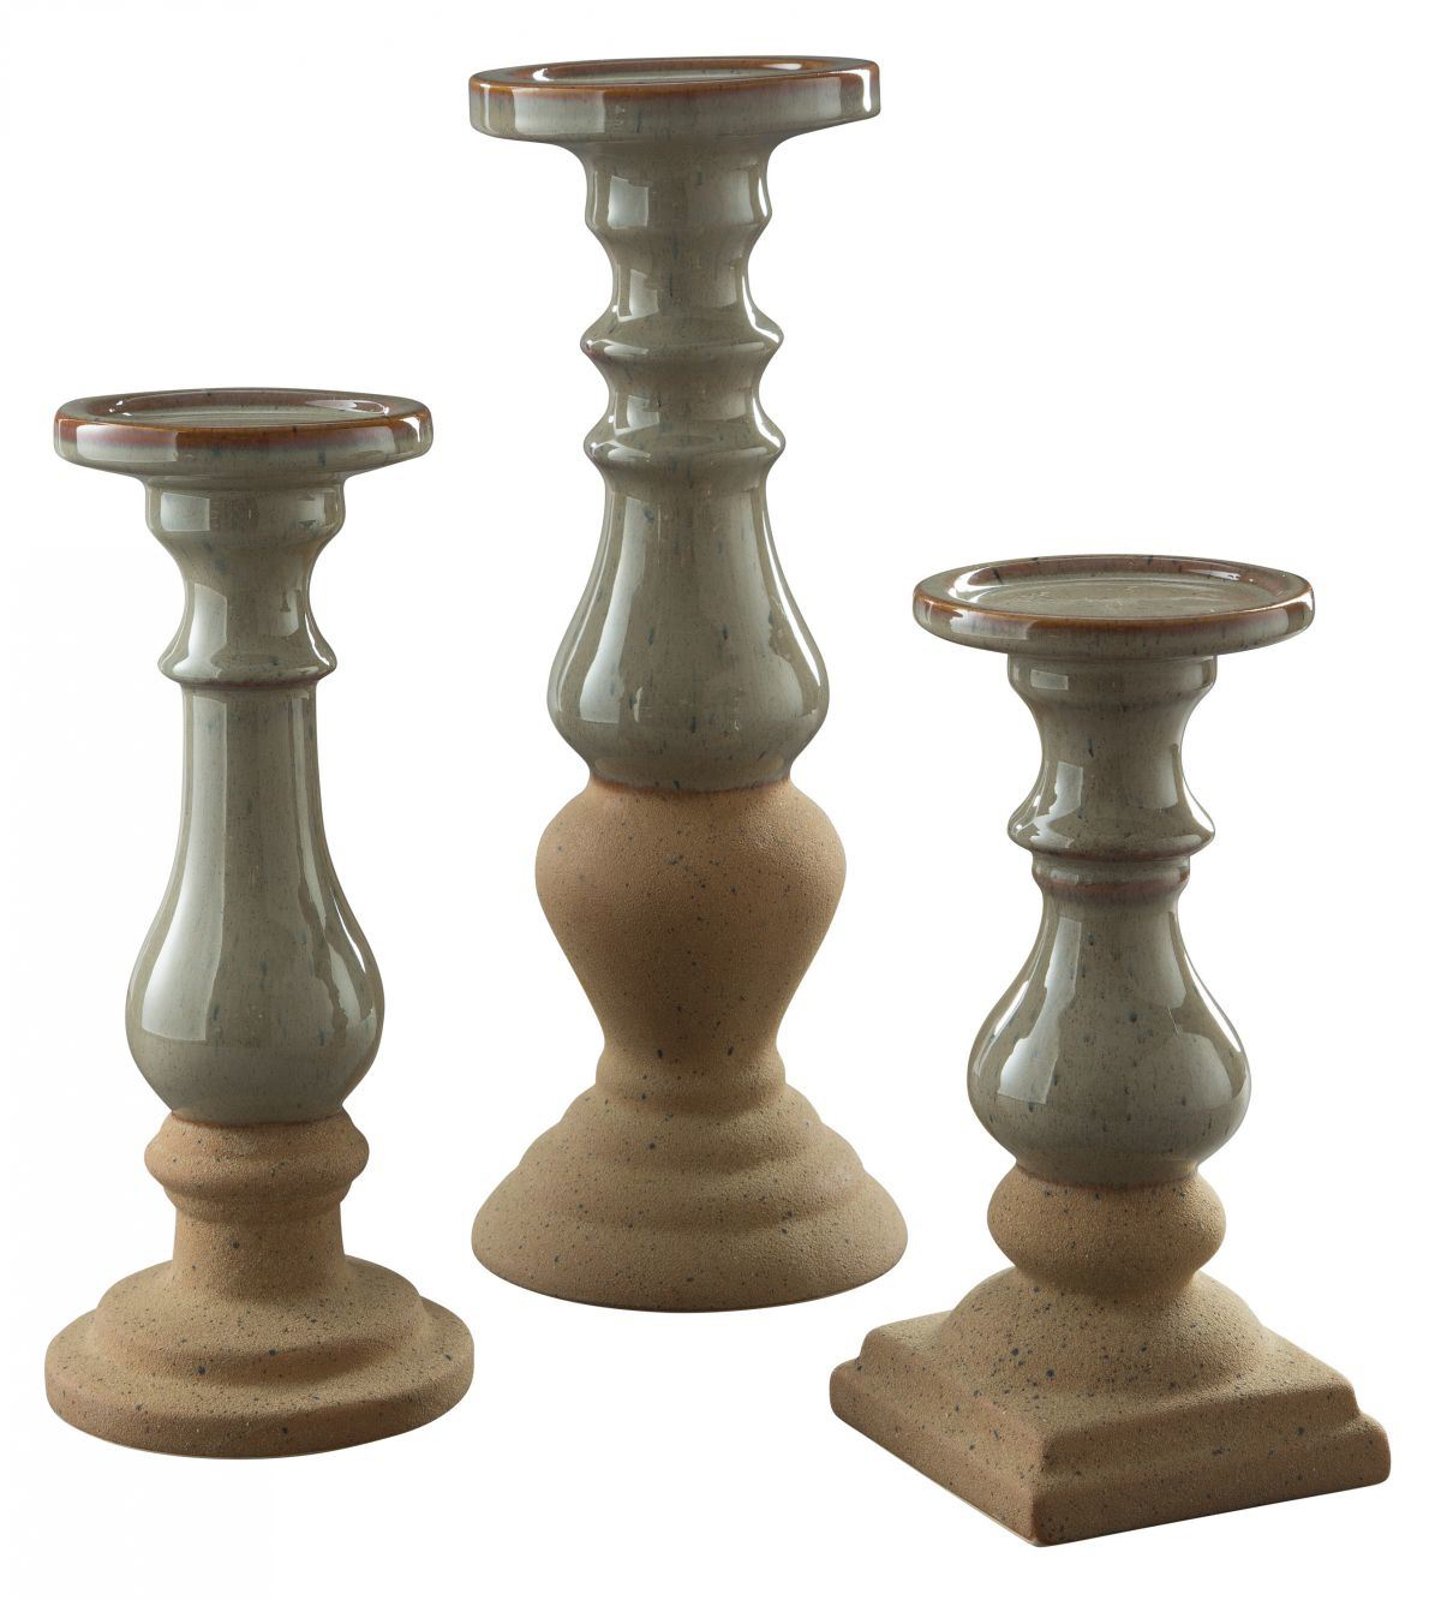 Picture of Emele 3 Piece Candle Holder Set